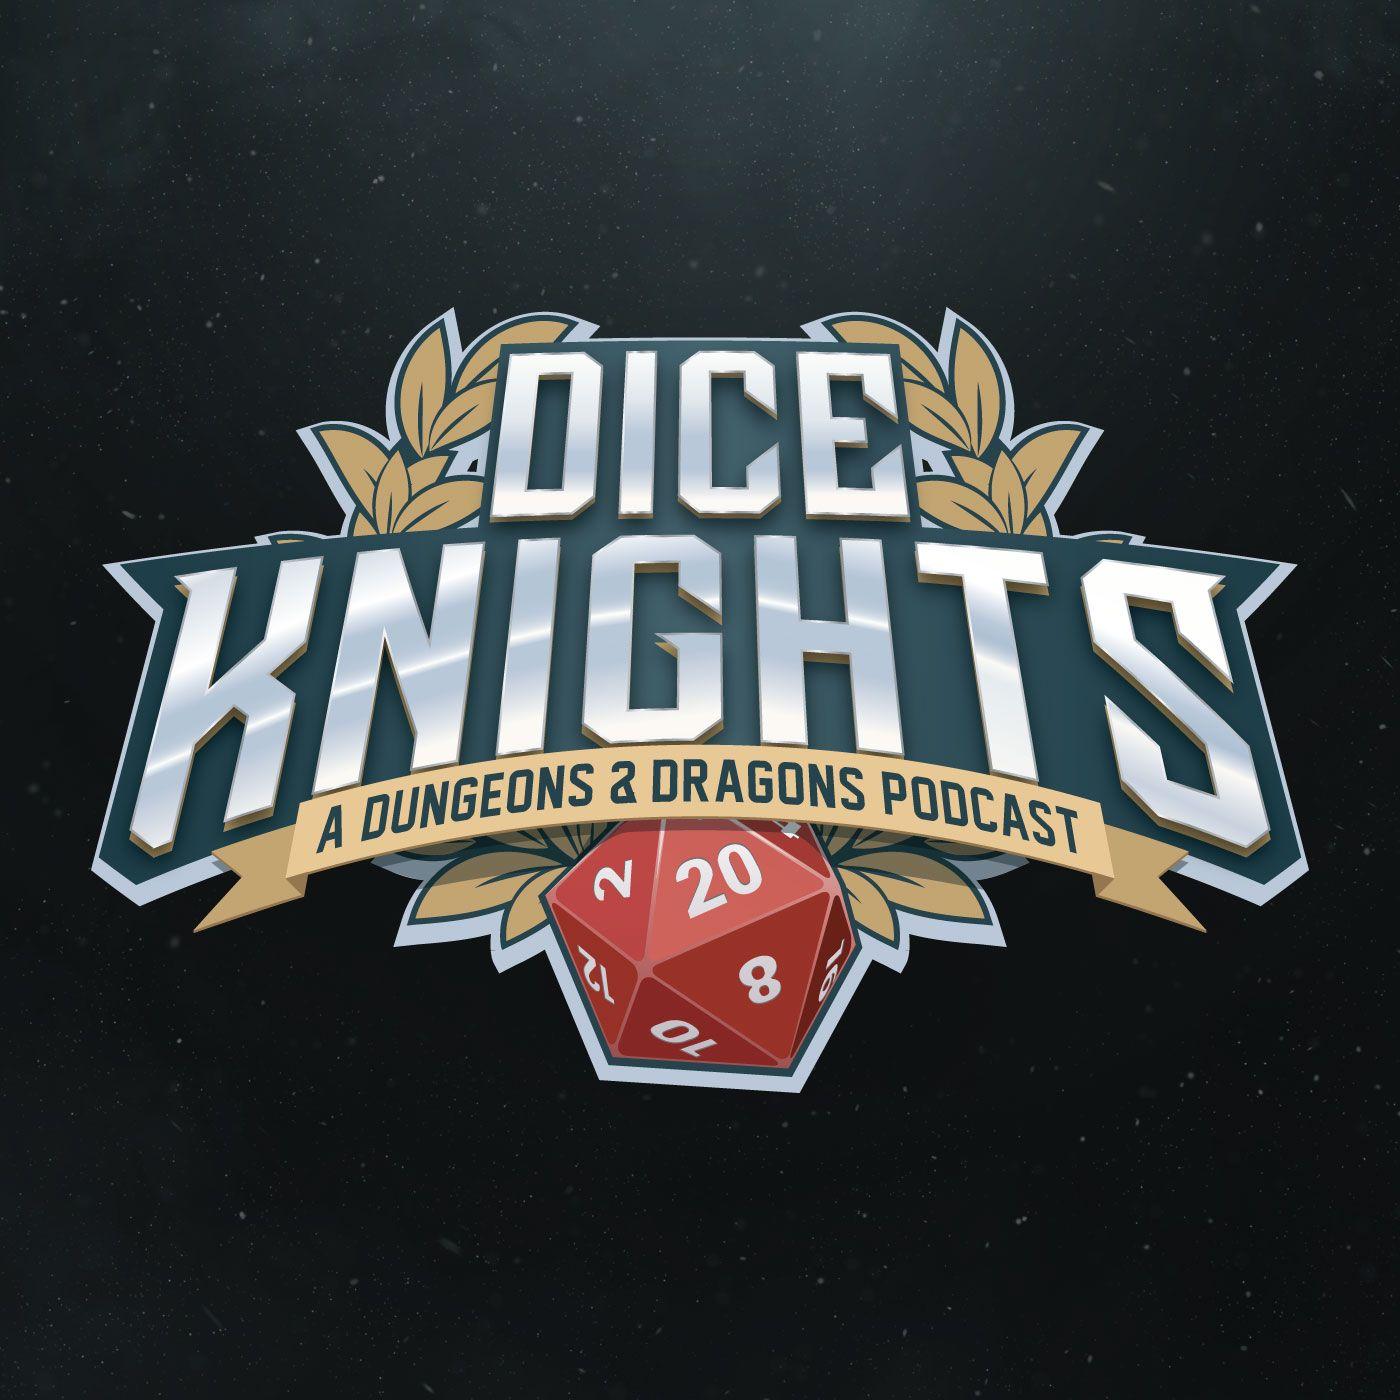 Google Play Podcast Logo - pod. fanatic. Podcast: DiceKnights: A D&D Actual Play Podcast